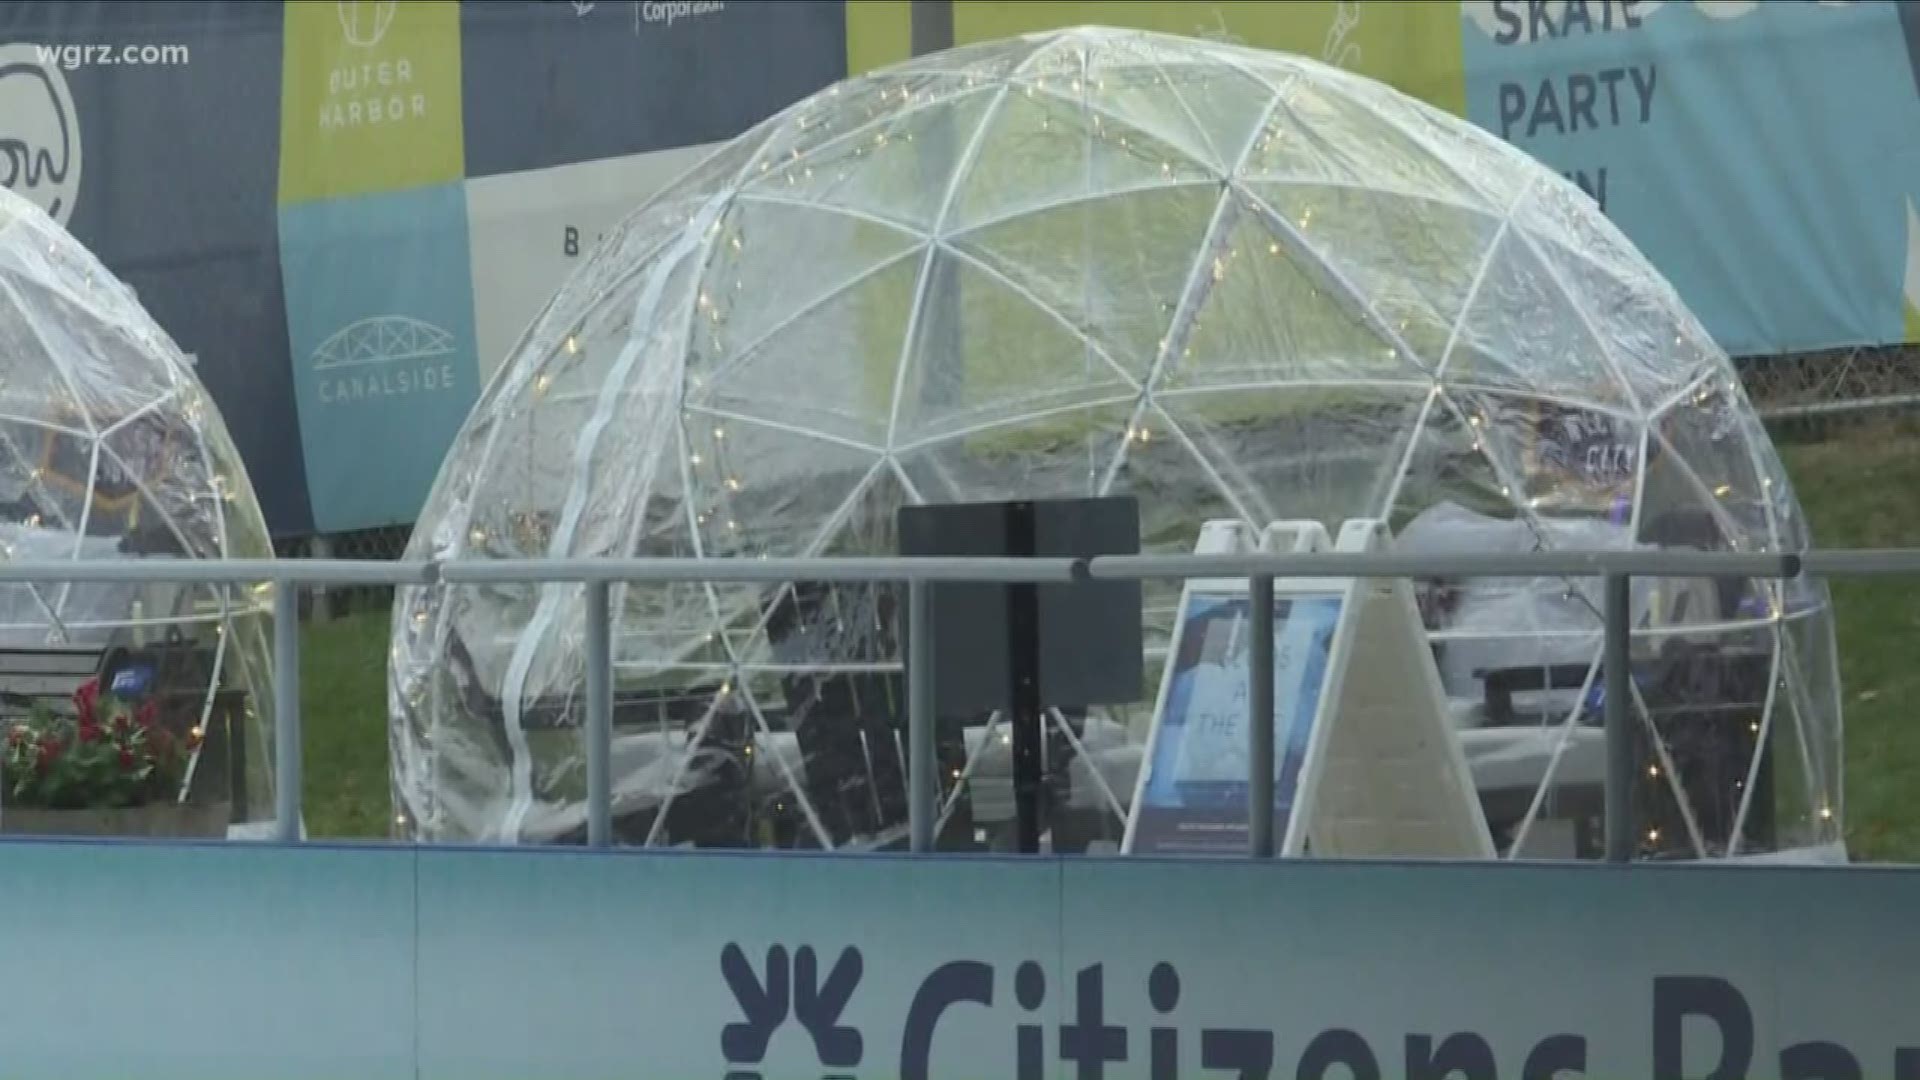 these new heated igloos ... that you can rent with a group ... and stay warm while enjoying the ice.